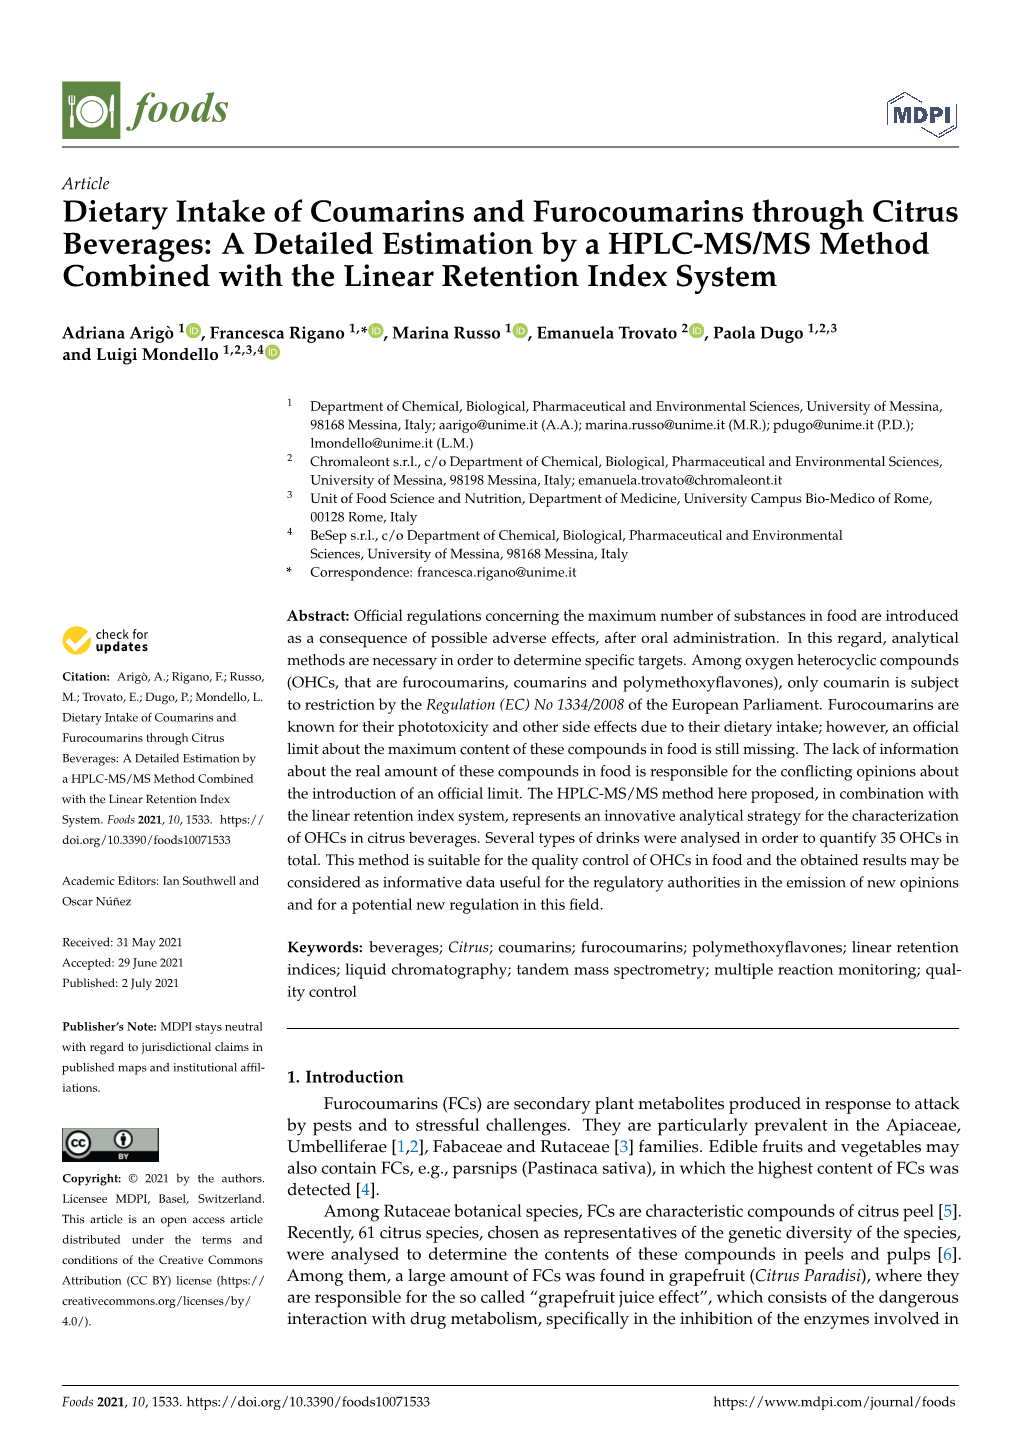 Dietary Intake of Coumarins and Furocoumarins Through Citrus Beverages: a Detailed Estimation by a HPLC-MS/MS Method Combined with the Linear Retention Index System